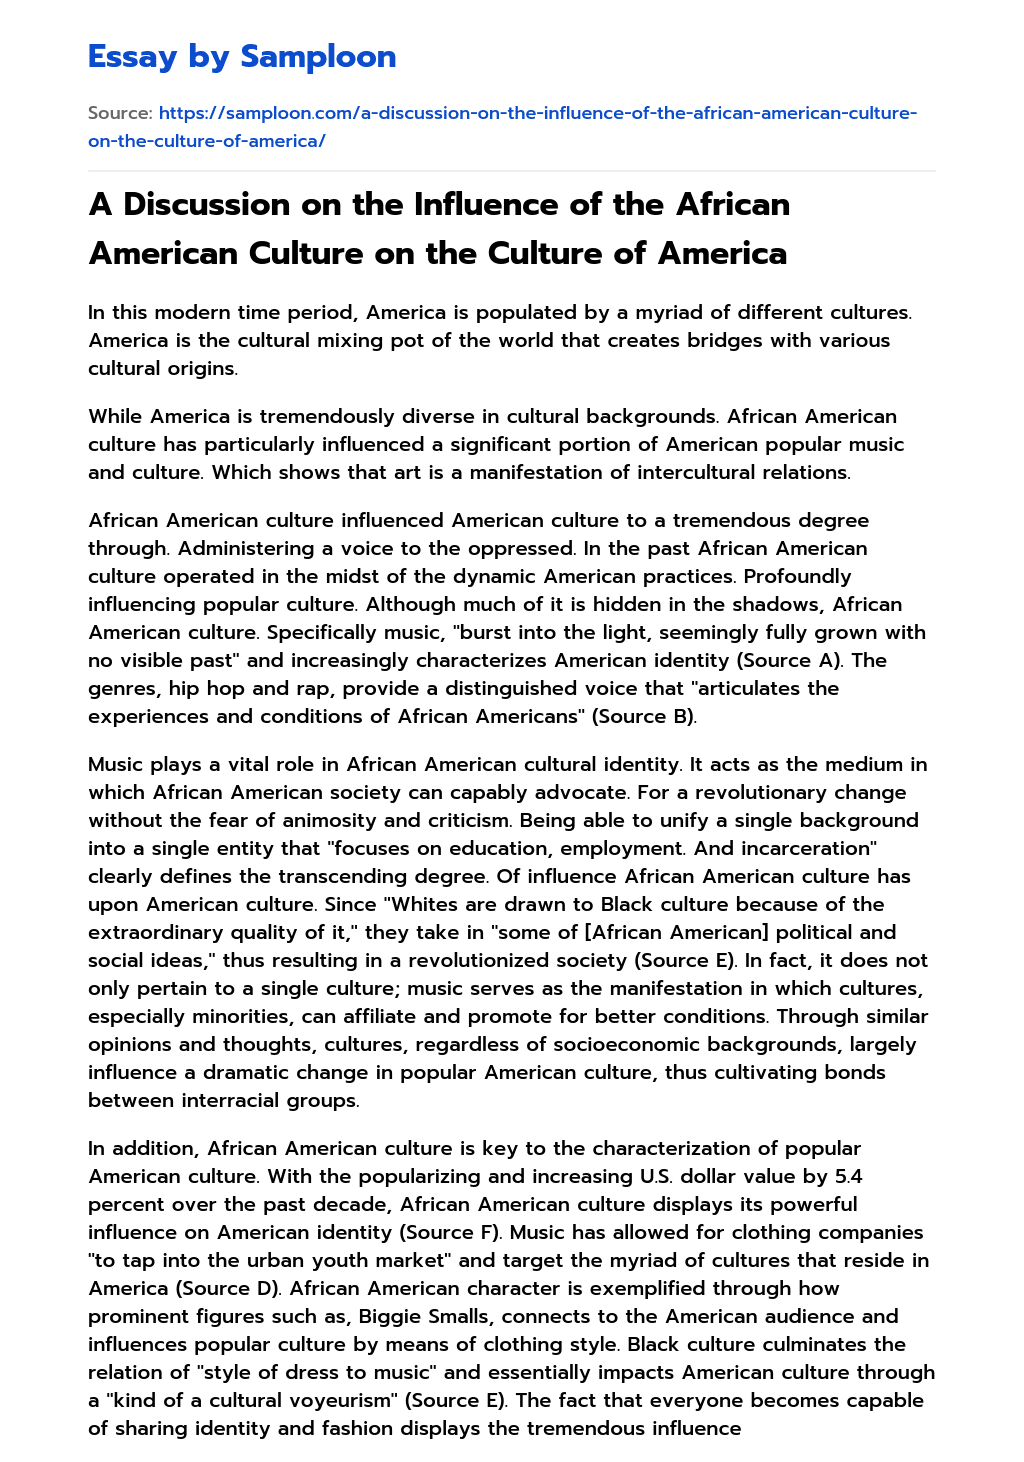 A Discussion on the Influence of the African American Culture on the Culture of America essay